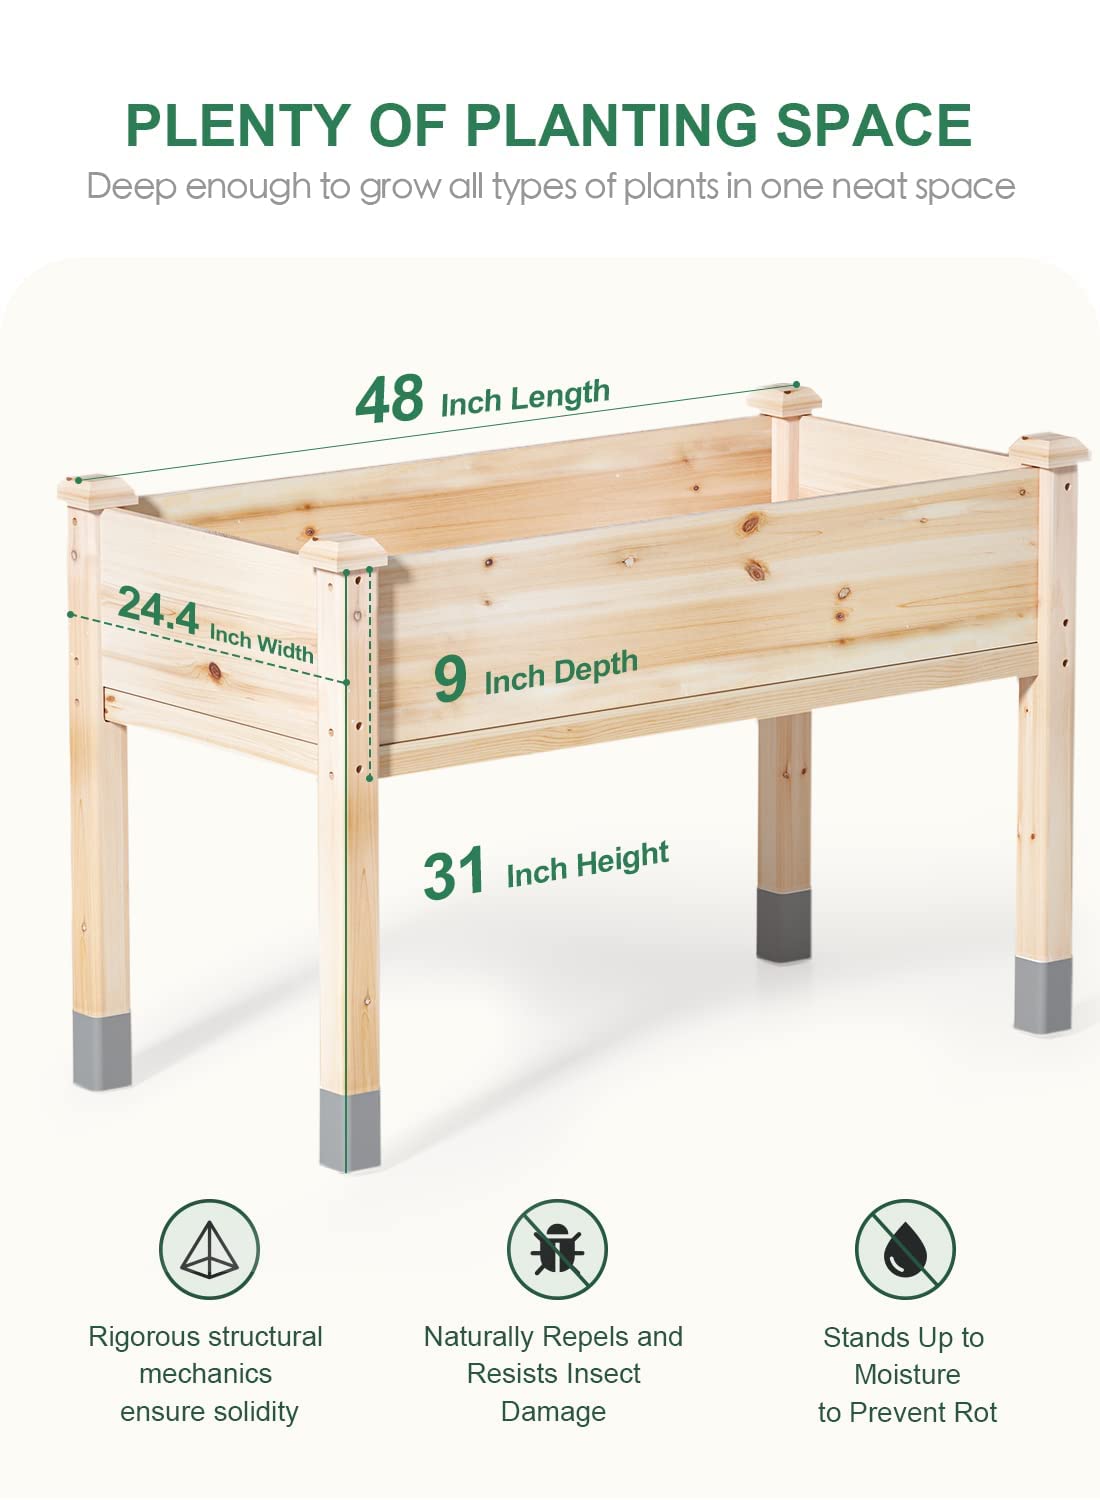 MIXC Wooden Raised Garden Bed with Legs, 48”L X 24”W, Elevated Reinforced Large Planter Box for Vegetable Flower Herb Outdoors - Beam and Column Structure - Unmatched Strength Outlast